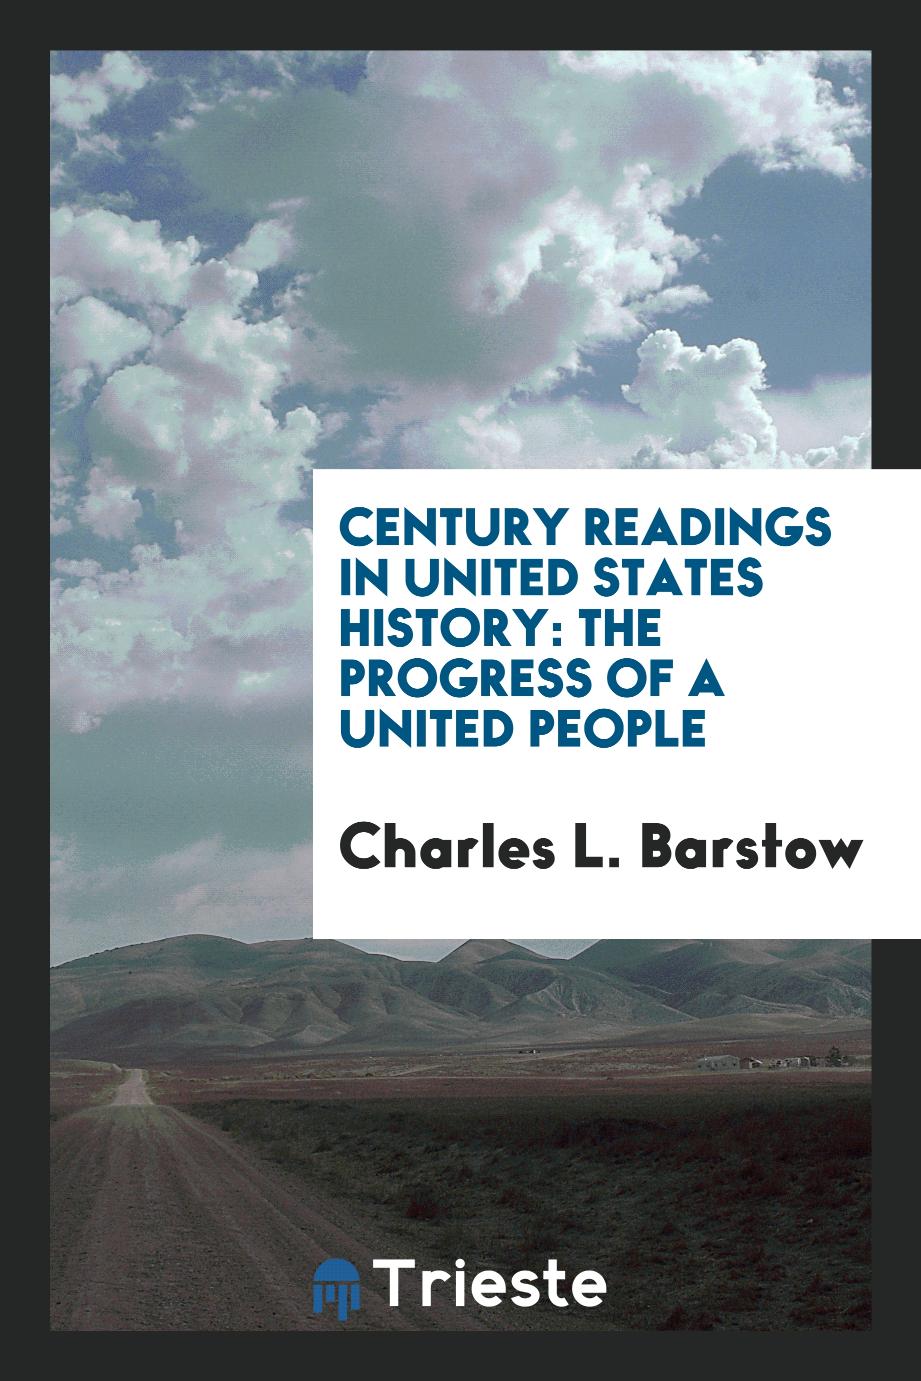 Century Readings in United States History: The Progress of a United People